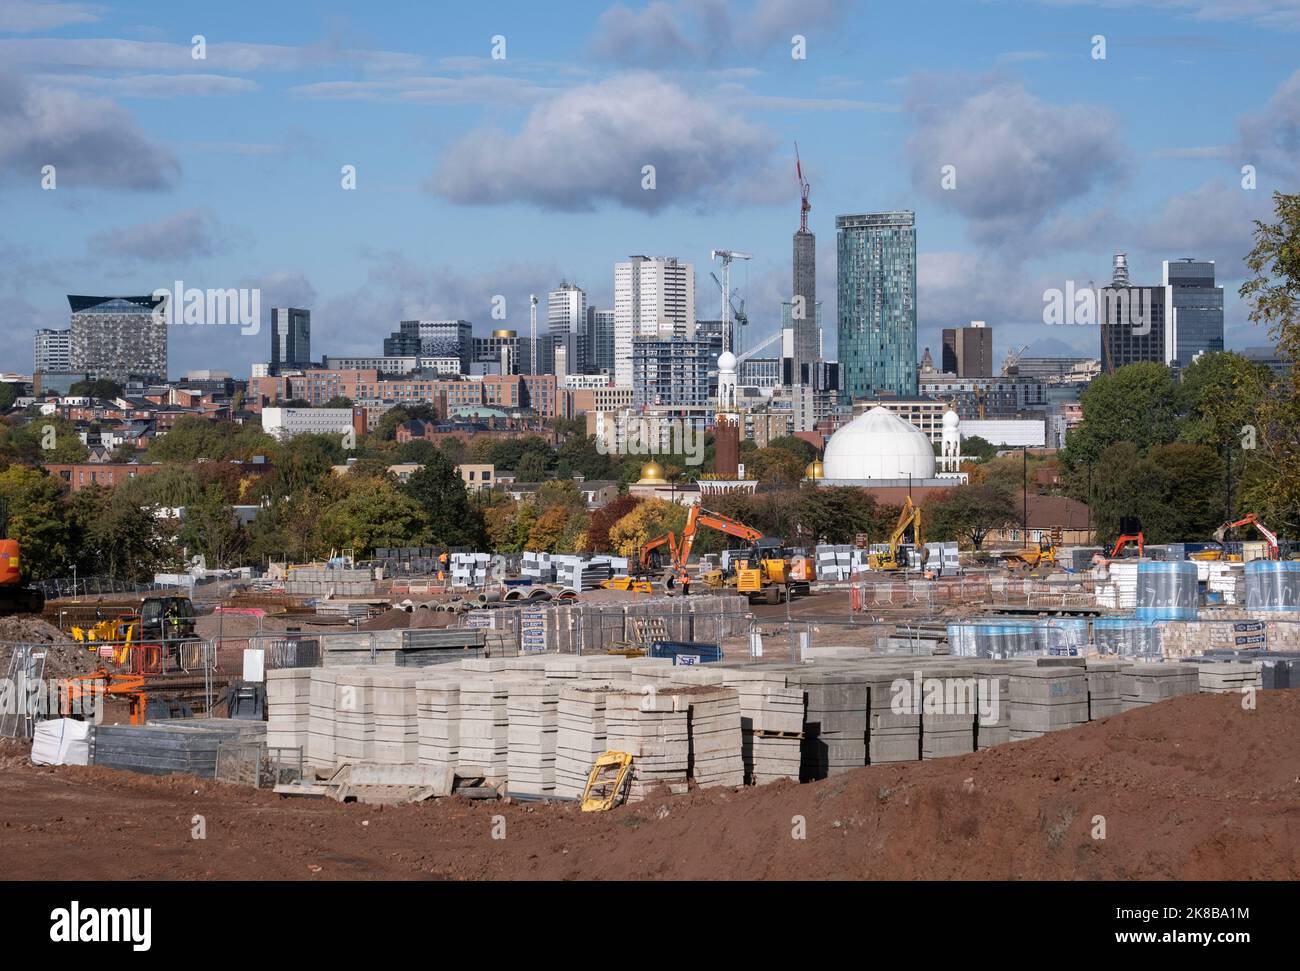 A view of the Birmingham City Centre skyline, England with tower block offices, construction site and cranes along with the Birmingham Central Mosque. Stock Photo